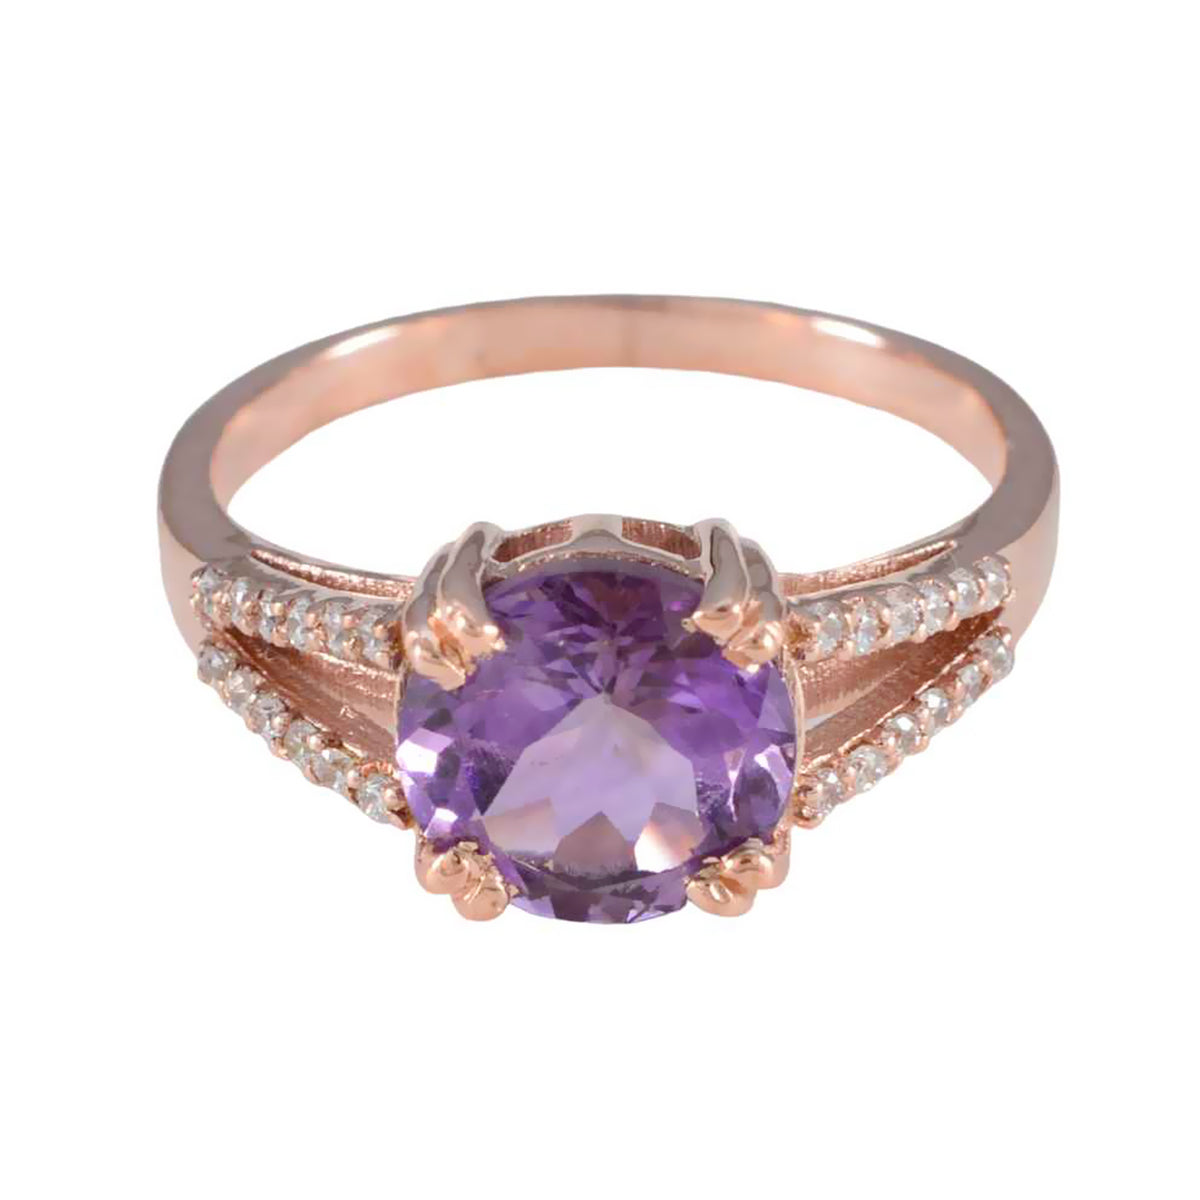 Riyo Jewelry Silver Ring With Rose Gold Plating Amethyst Stone Round Shape Prong Setting Bridal Jewelry Halloween Ring